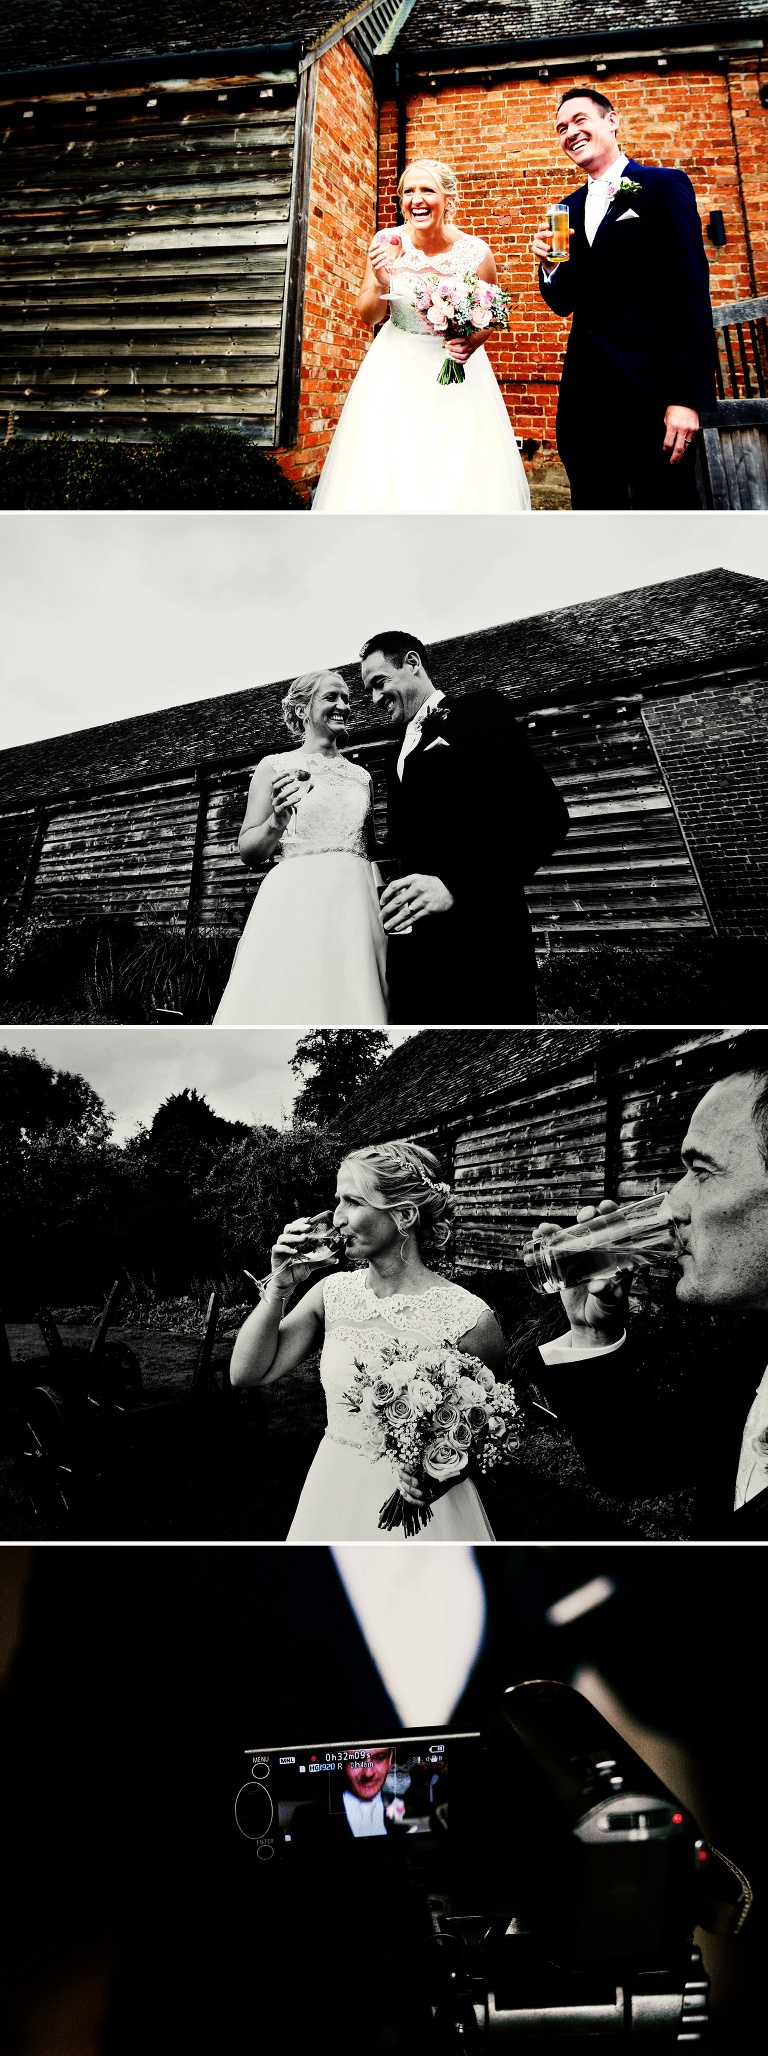 Black and white wedding portraits at bassmead manor barns in cambridgeshire